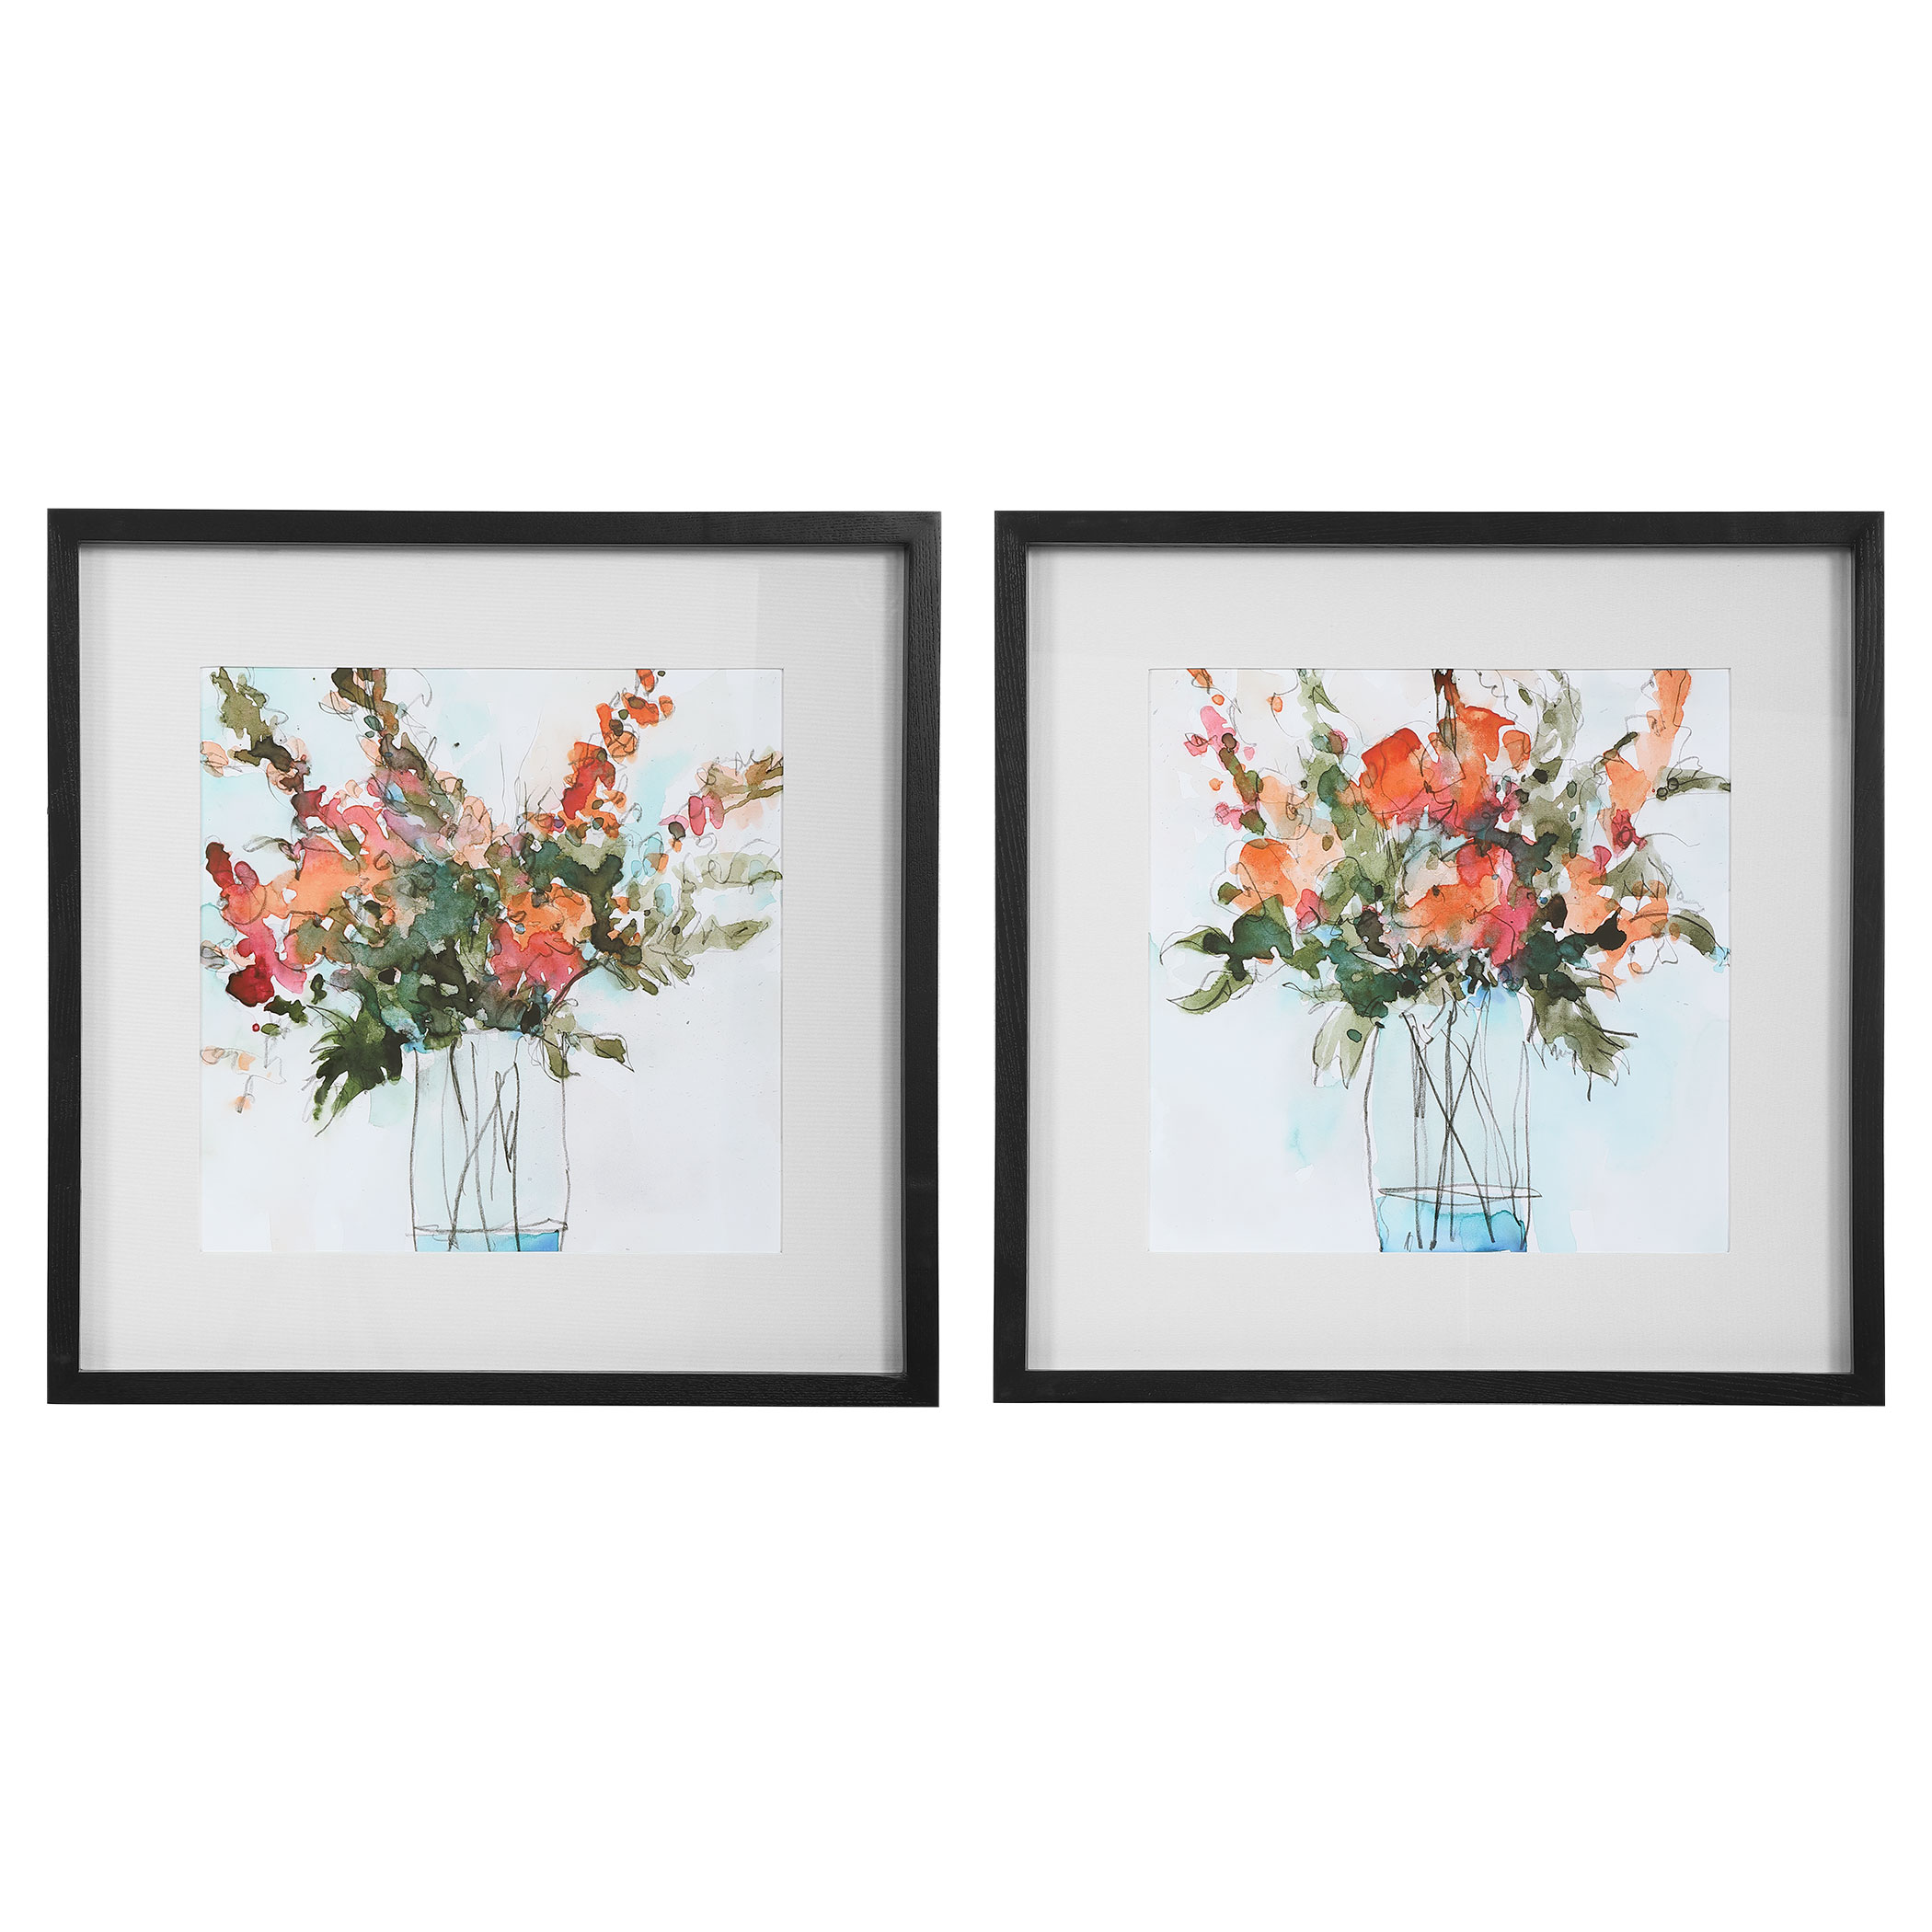 Online Designer Home/Small Office Fresh Flowers Watercolor Prints, S/2